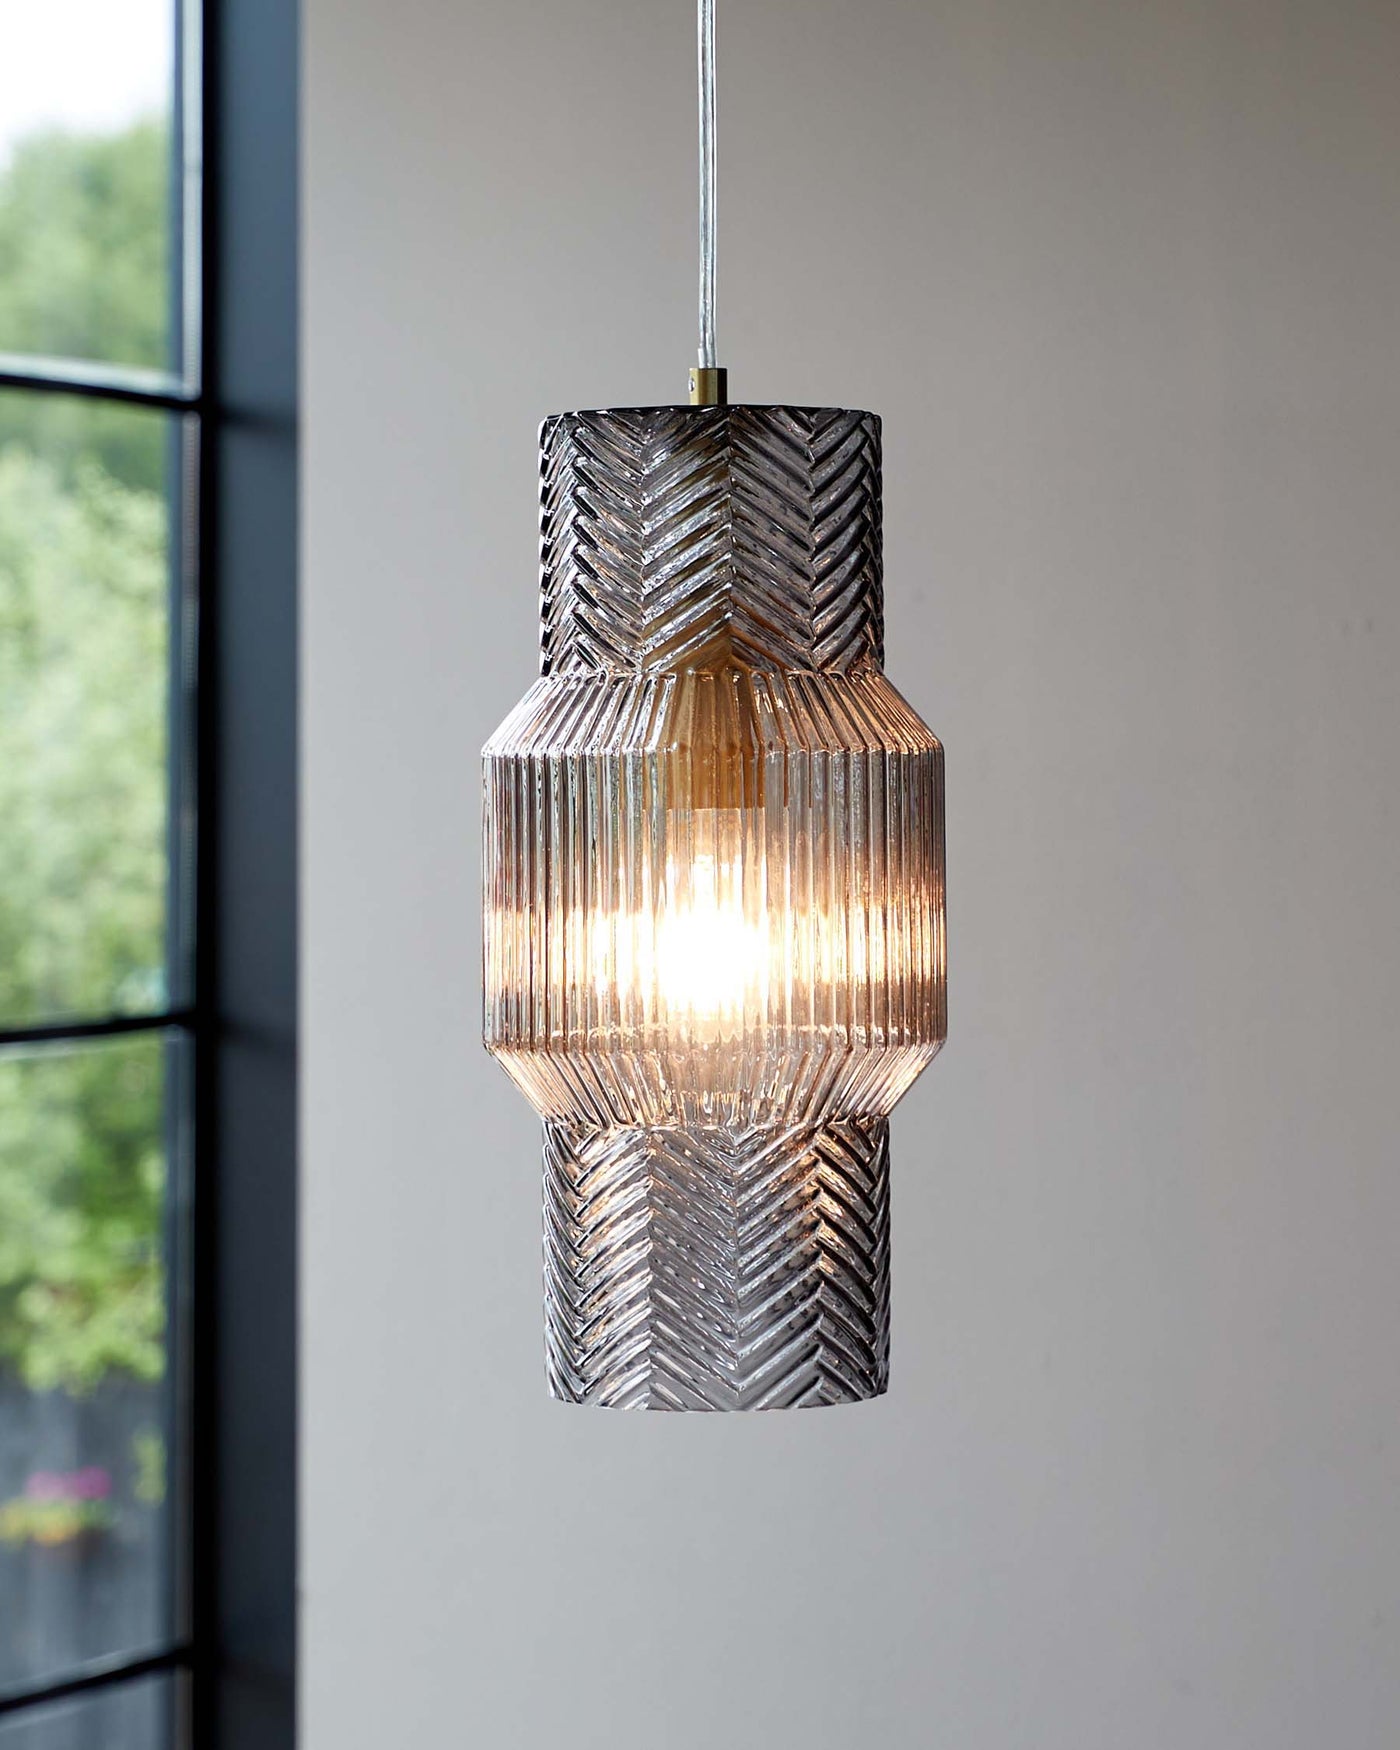 Elegant pendant light with a textured glass design comprising multiple angular ridges, creating a sparkling lighting effect. The fixture features two distinct sections, a smaller top part atop a larger bottom section, both with a matching geometric pattern. A warm glow emanates from within, highlighted by the glass's ridges. The light suspends from a metallic cord, complementing the modern and sophisticated look, perfect for a contemporary interior setting.